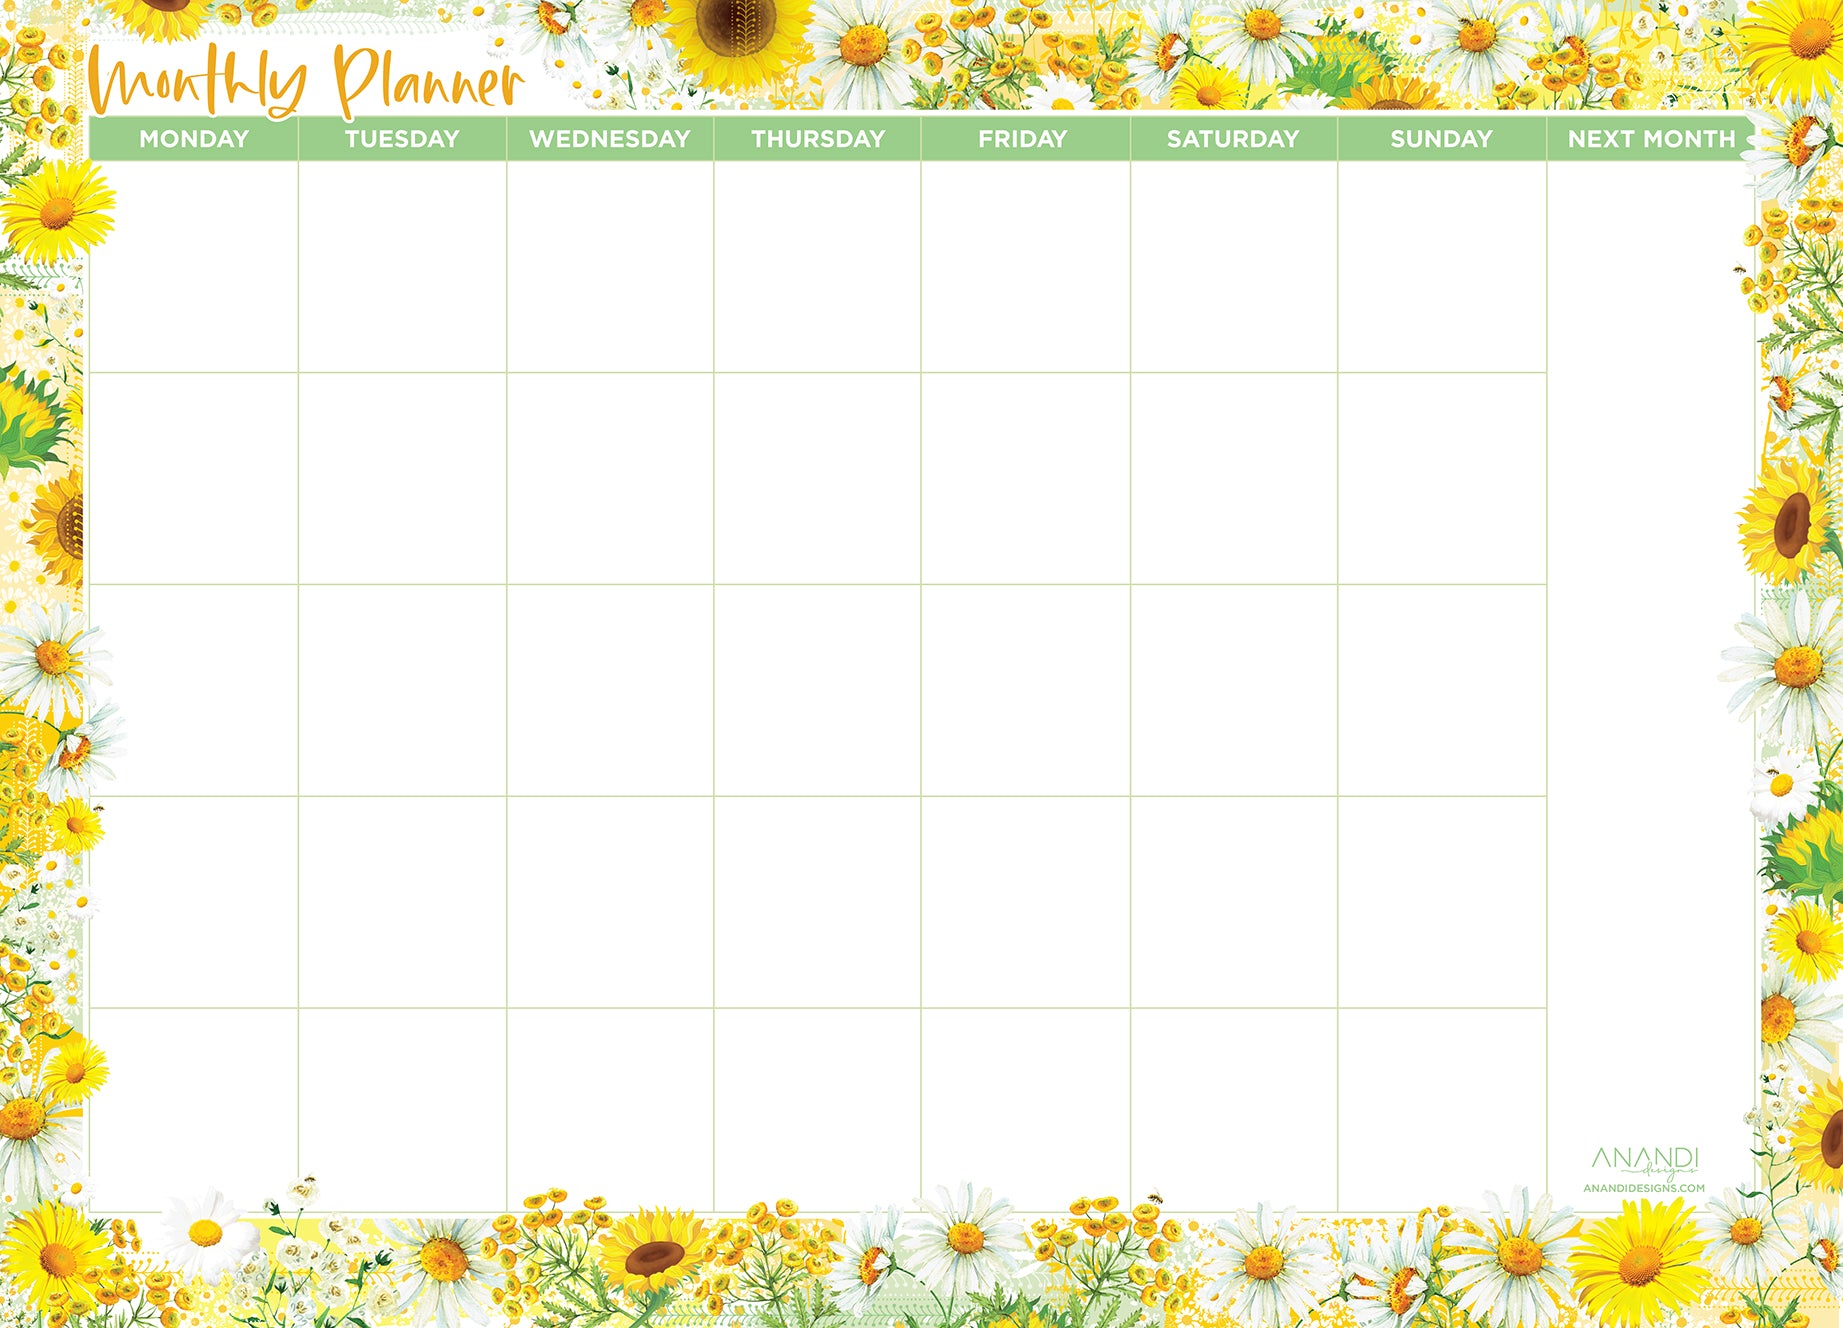 Magnetic Monthly Planner - Sunny Days - Sunflowers (LARGE 43cm x 31cm)